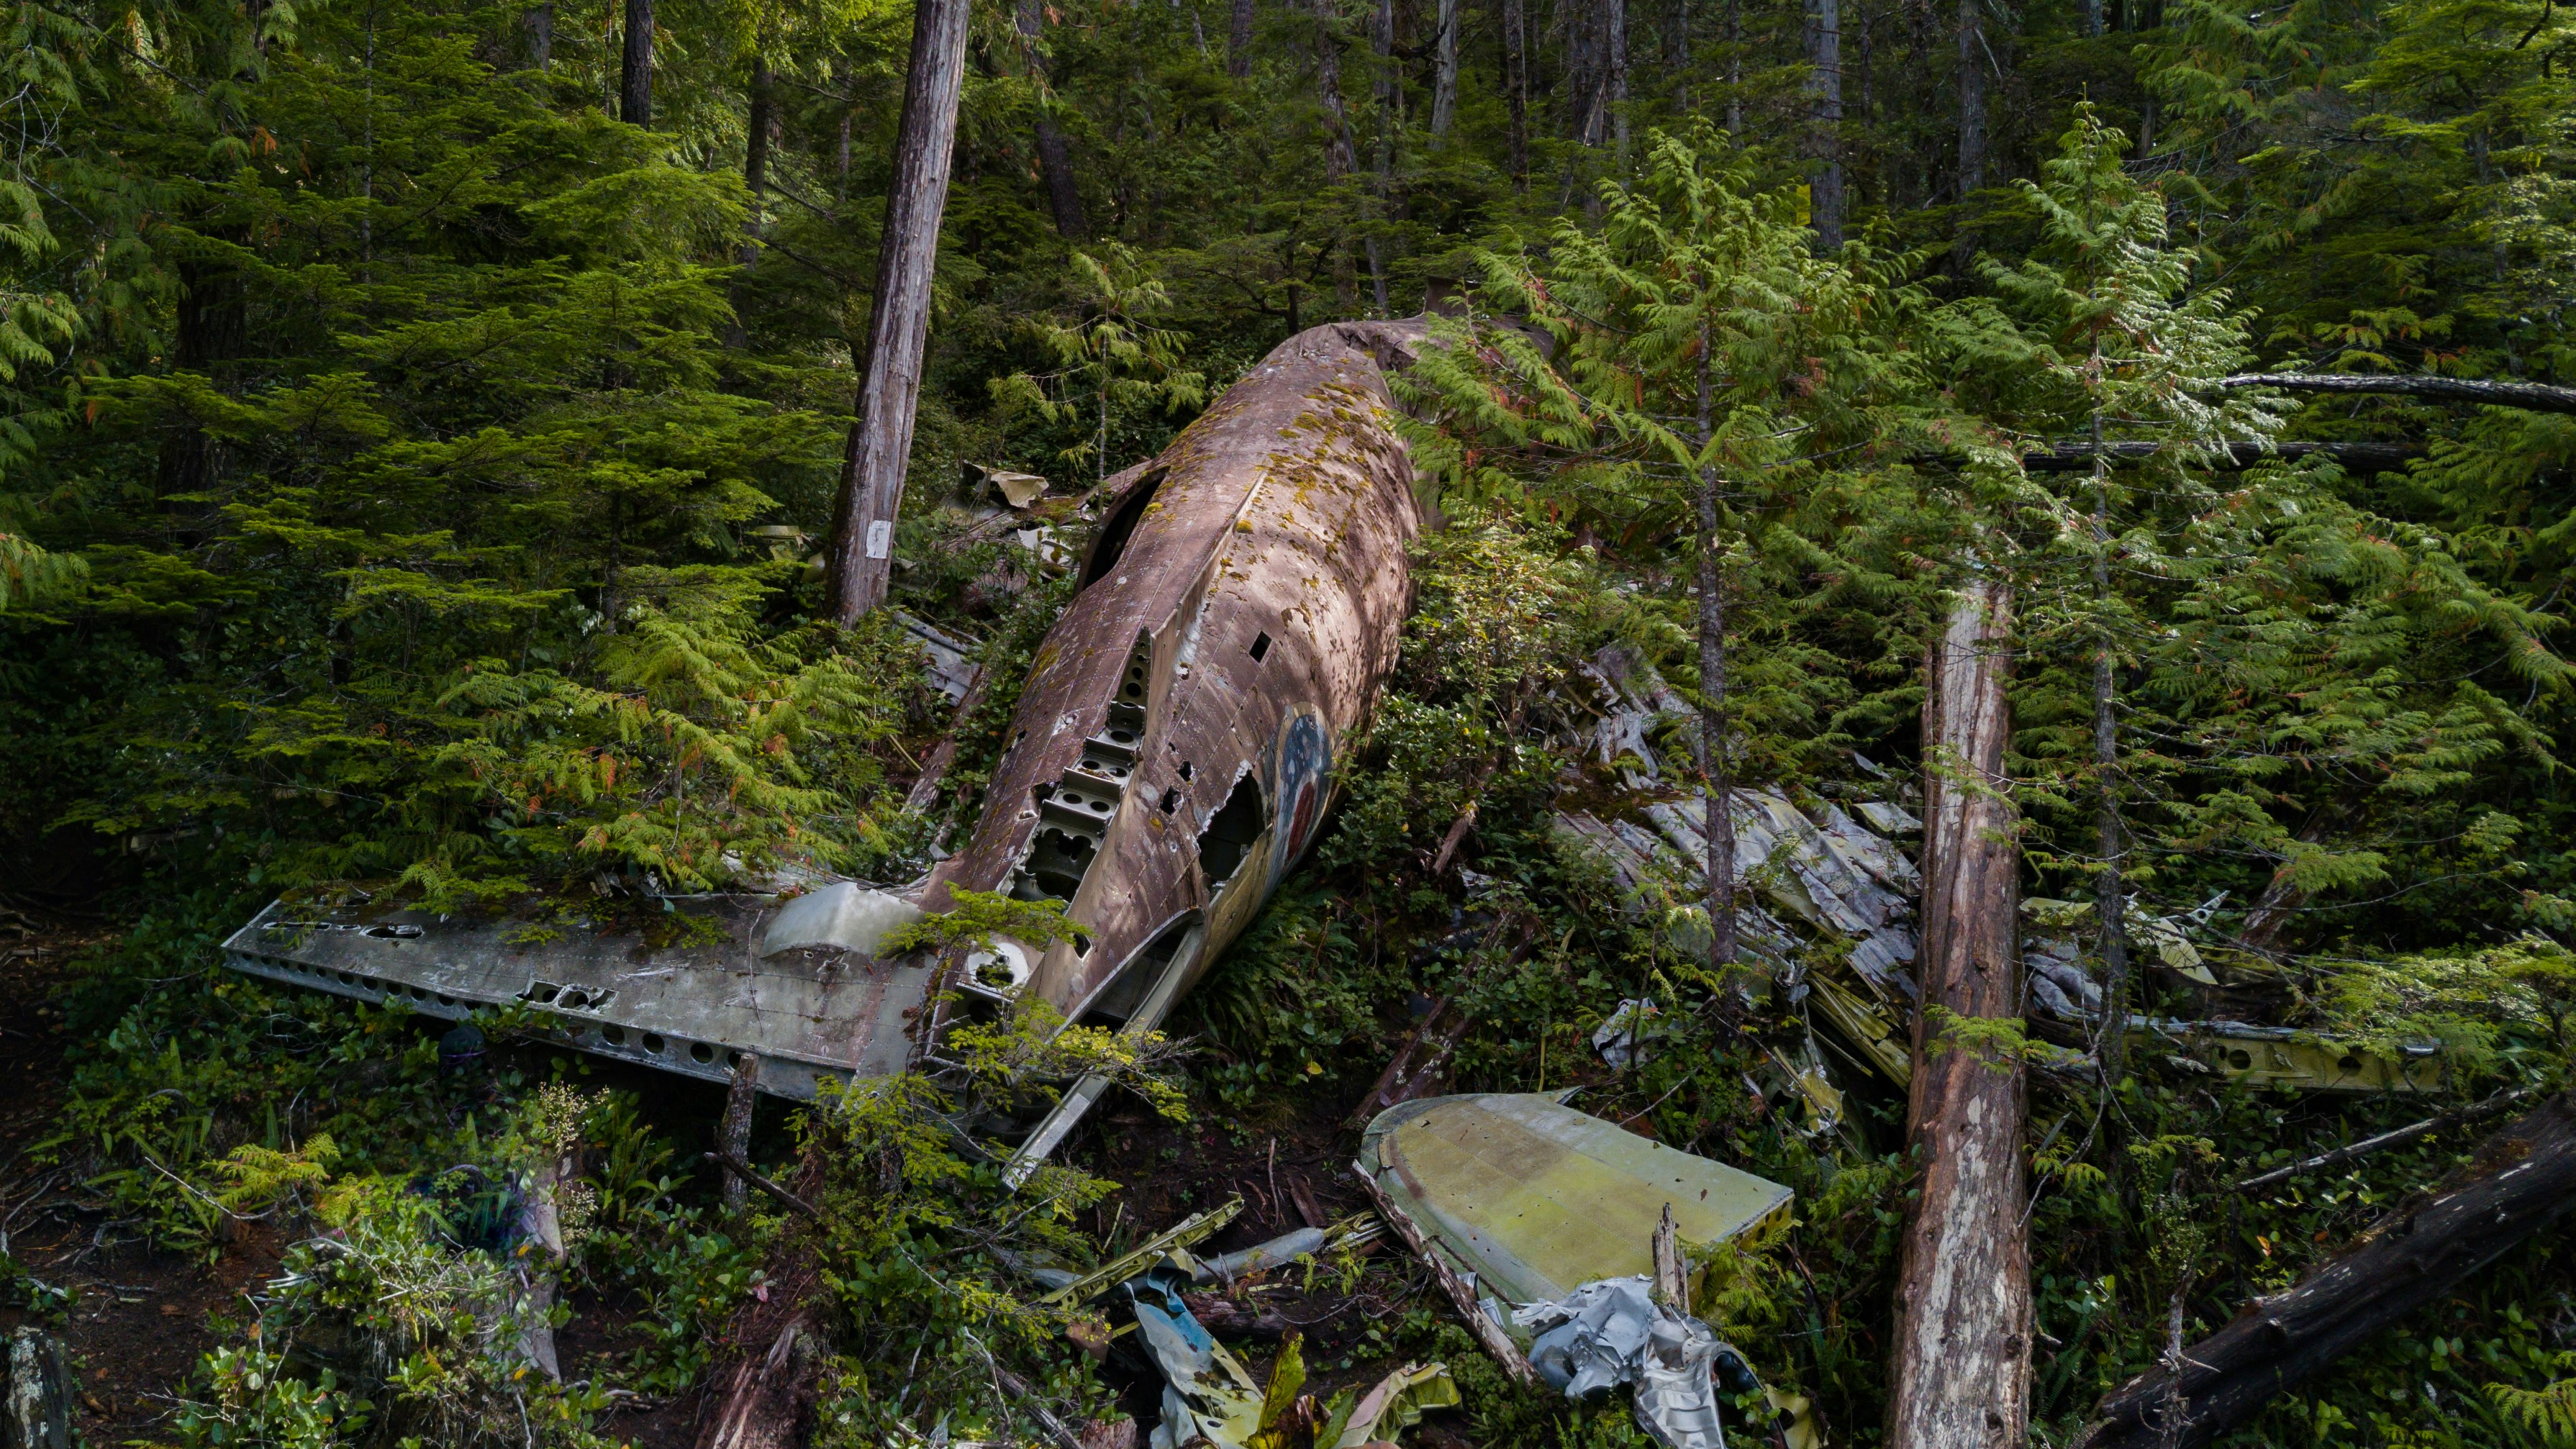 wrecked plane in forest during daytime